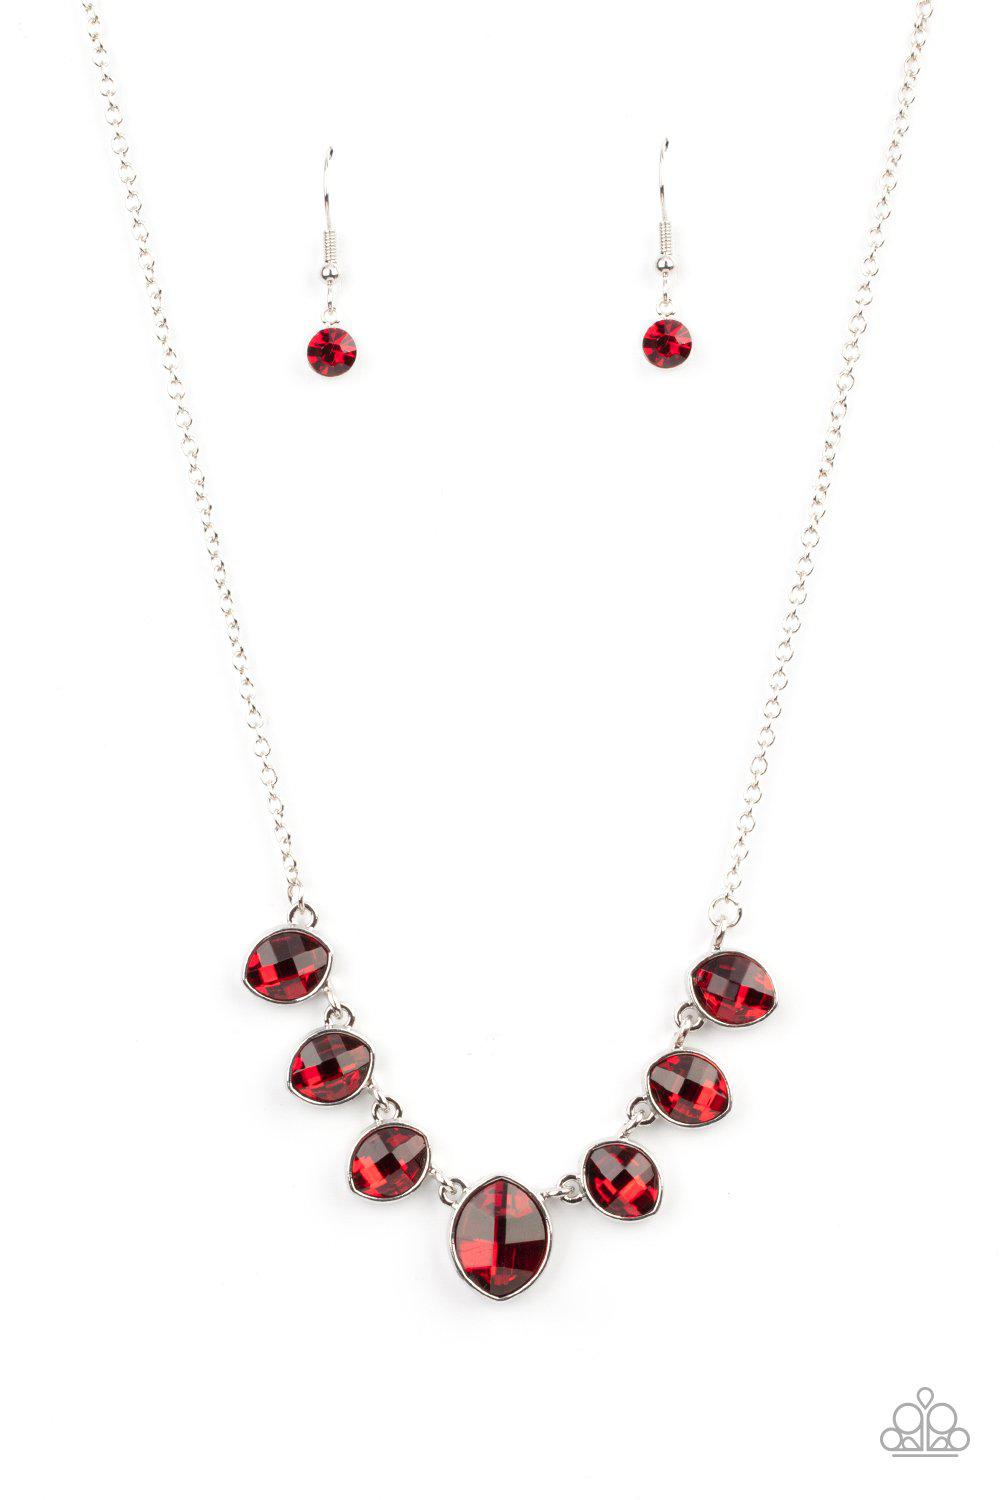 Material Girl Glamour Red Rhinestone Necklace - Paparazzi Accessories- lightbox - CarasShop.com - $5 Jewelry by Cara Jewels